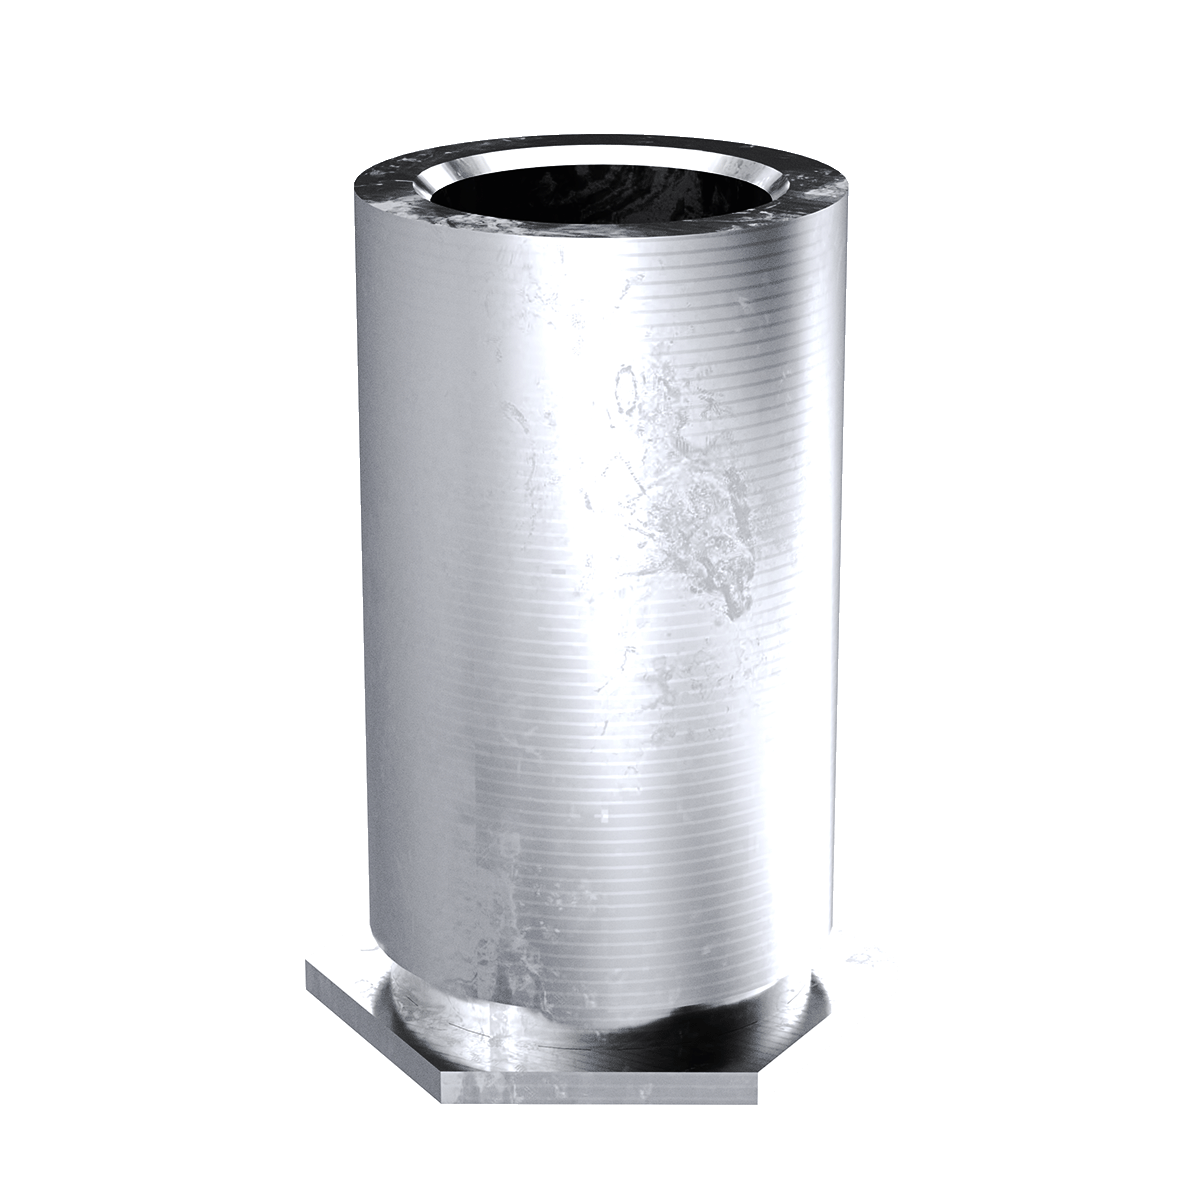 Self-Clinching Standoff, Through Unthreaded, 300 Series Stainless Steel, Passivated, 0.116 x 0.375, Hole Dia.: 0.213, 100 Pack